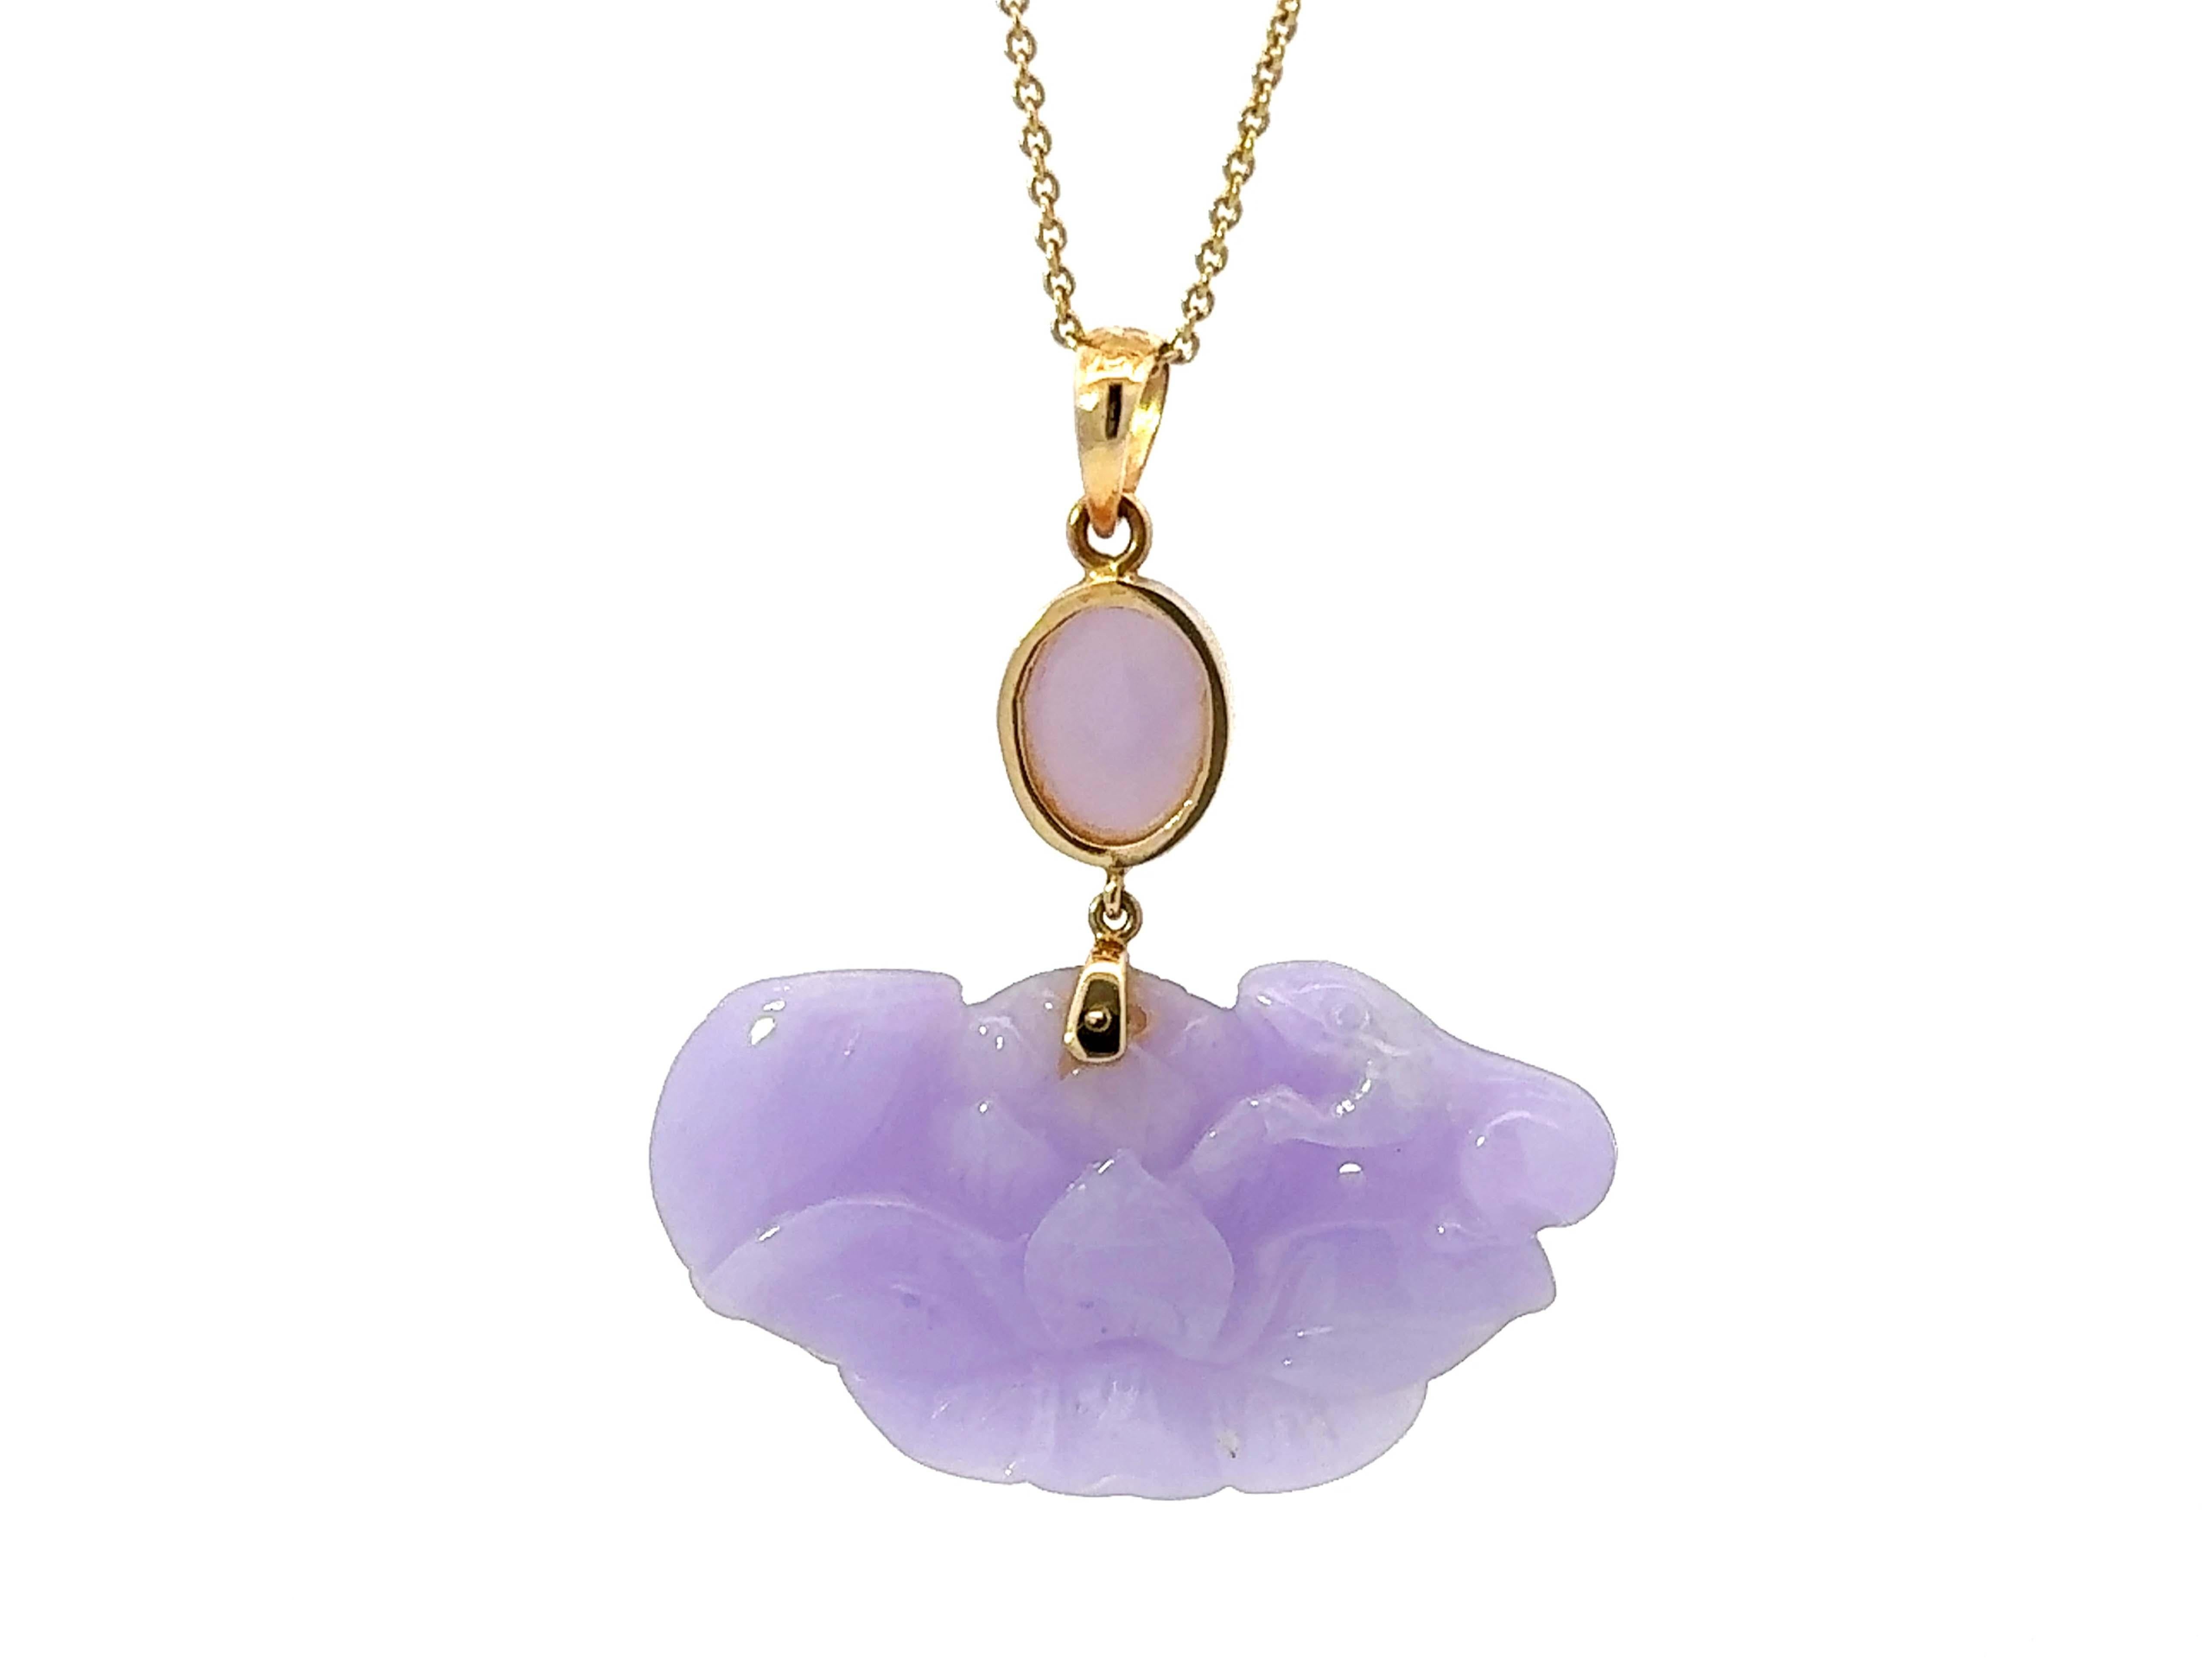 Lavender Jade Lotus Frog Necklace 14K Yellow Gold For Sale 1